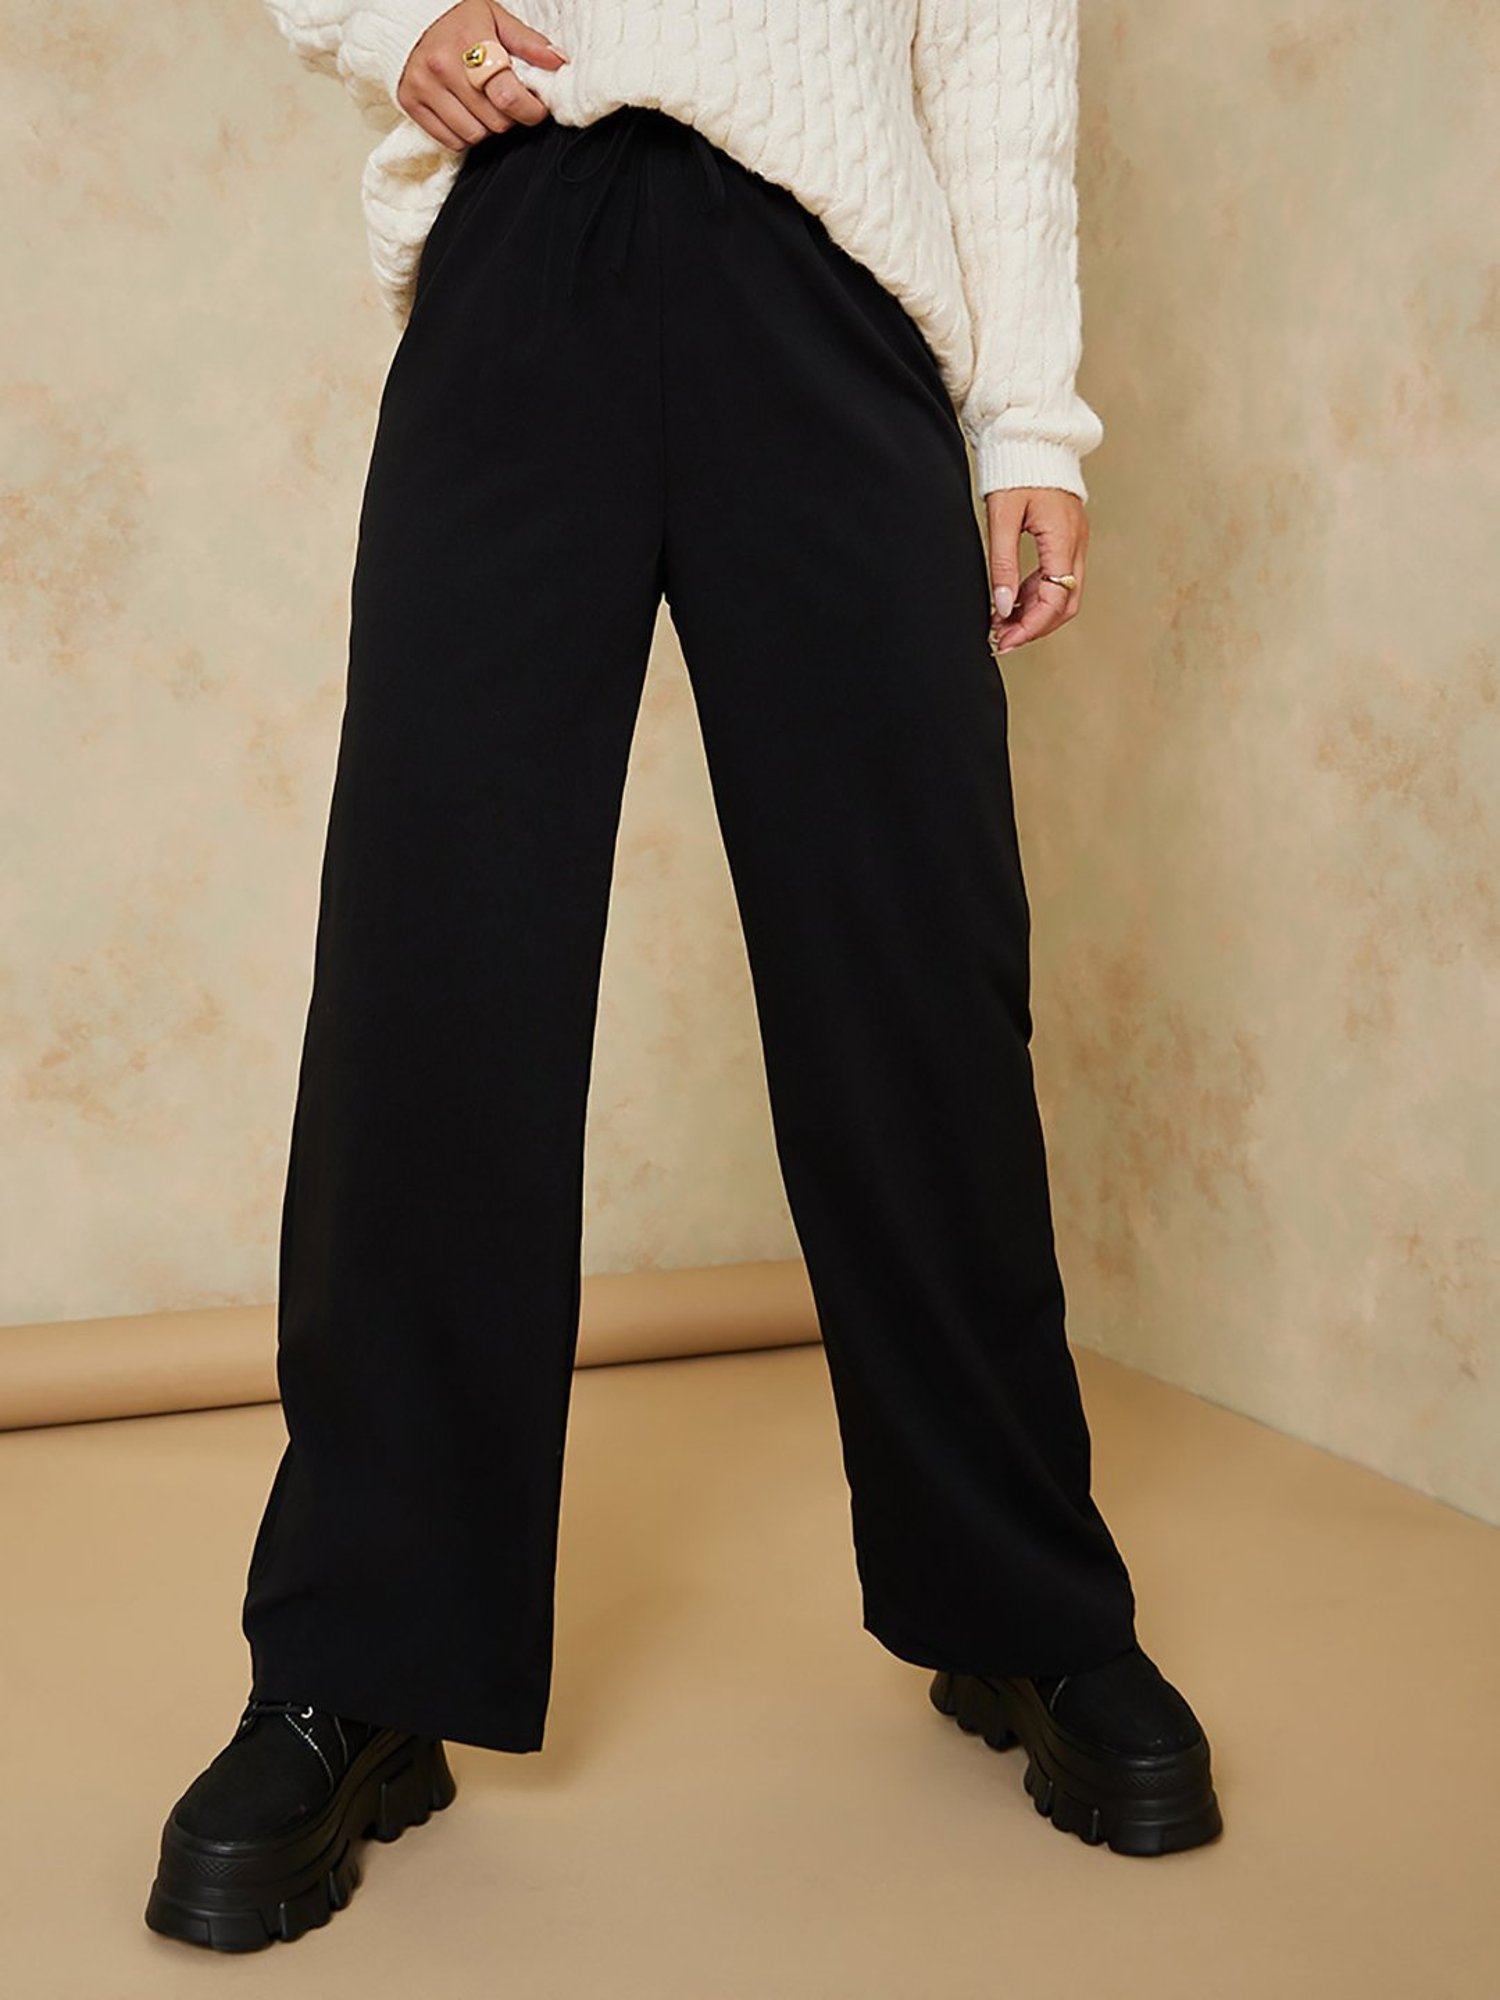 KASSUALLY Trousers and Pants  Buy KASSUALLY Maroon Bootcut High Rise  Trouser Online  Nykaa Fashion